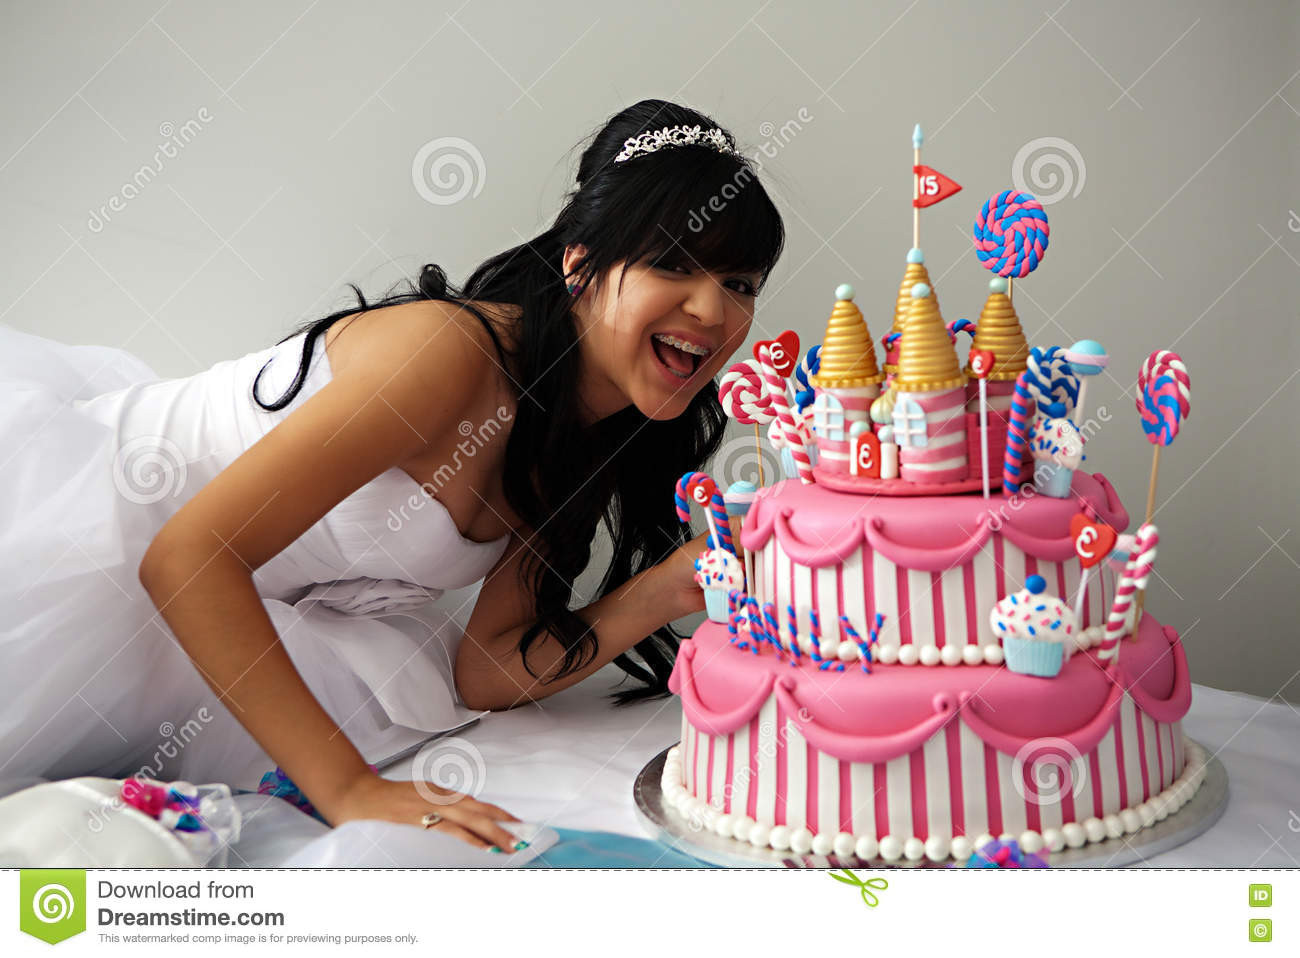 Girls 15 Birthday Party Ideas
 Quinceanera Birthday Cake stock image Image of iced